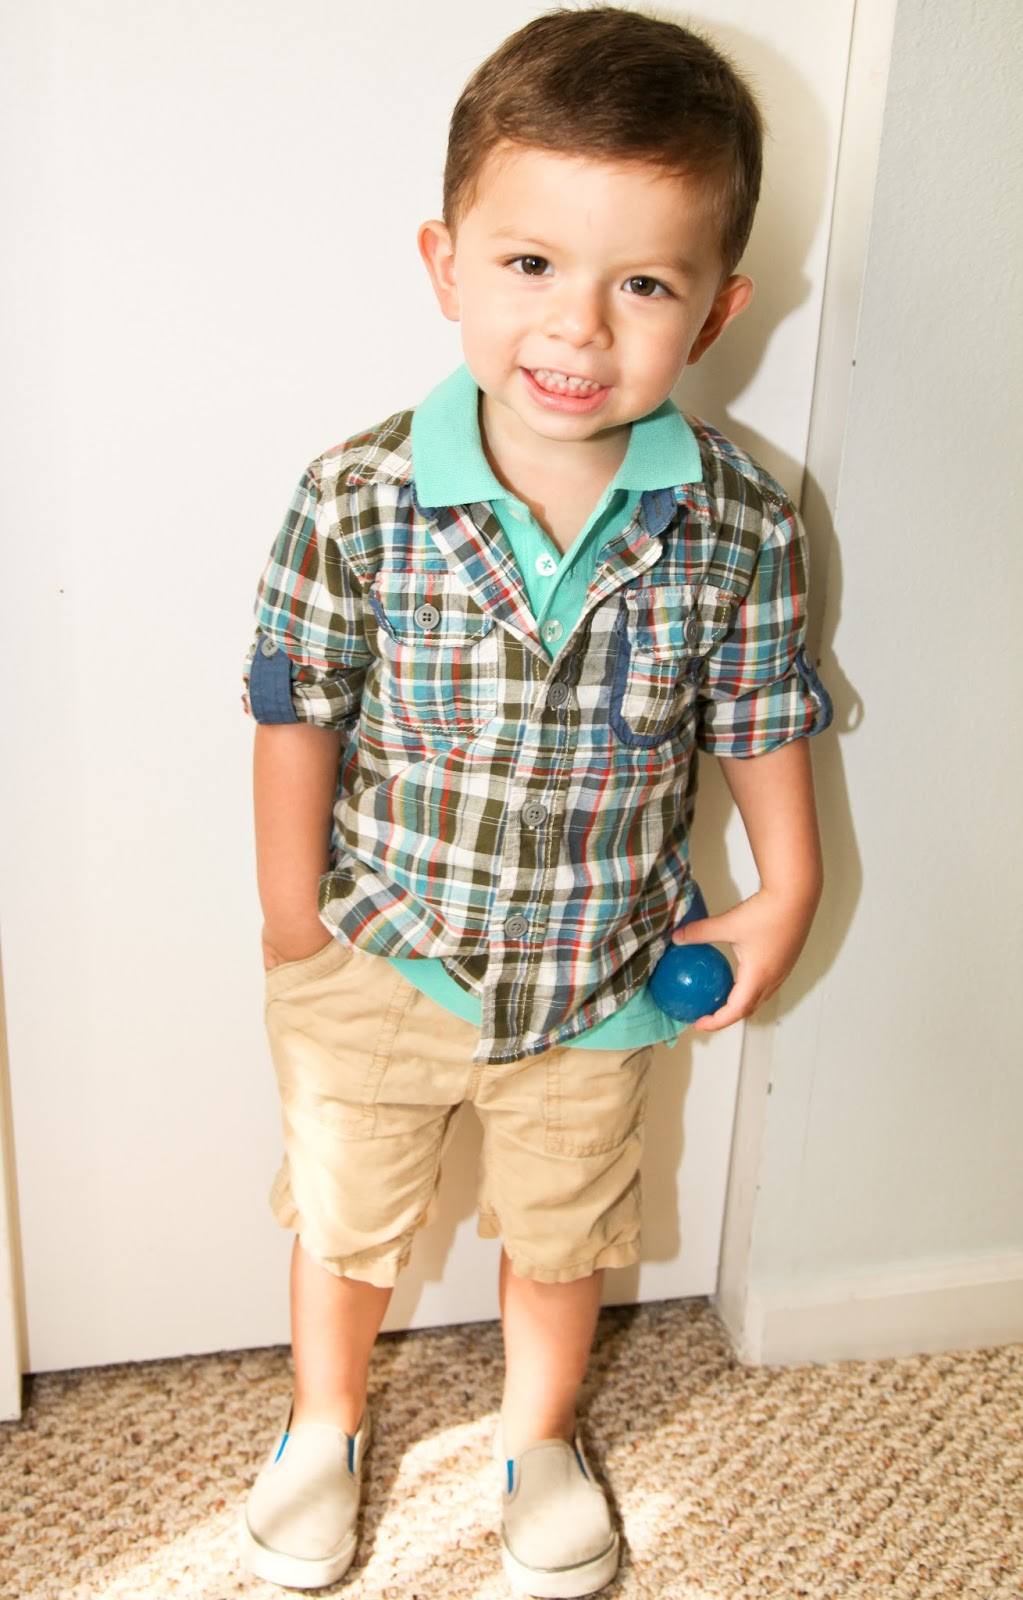 Toddler Boy OOTD - Kids Style On a Budget